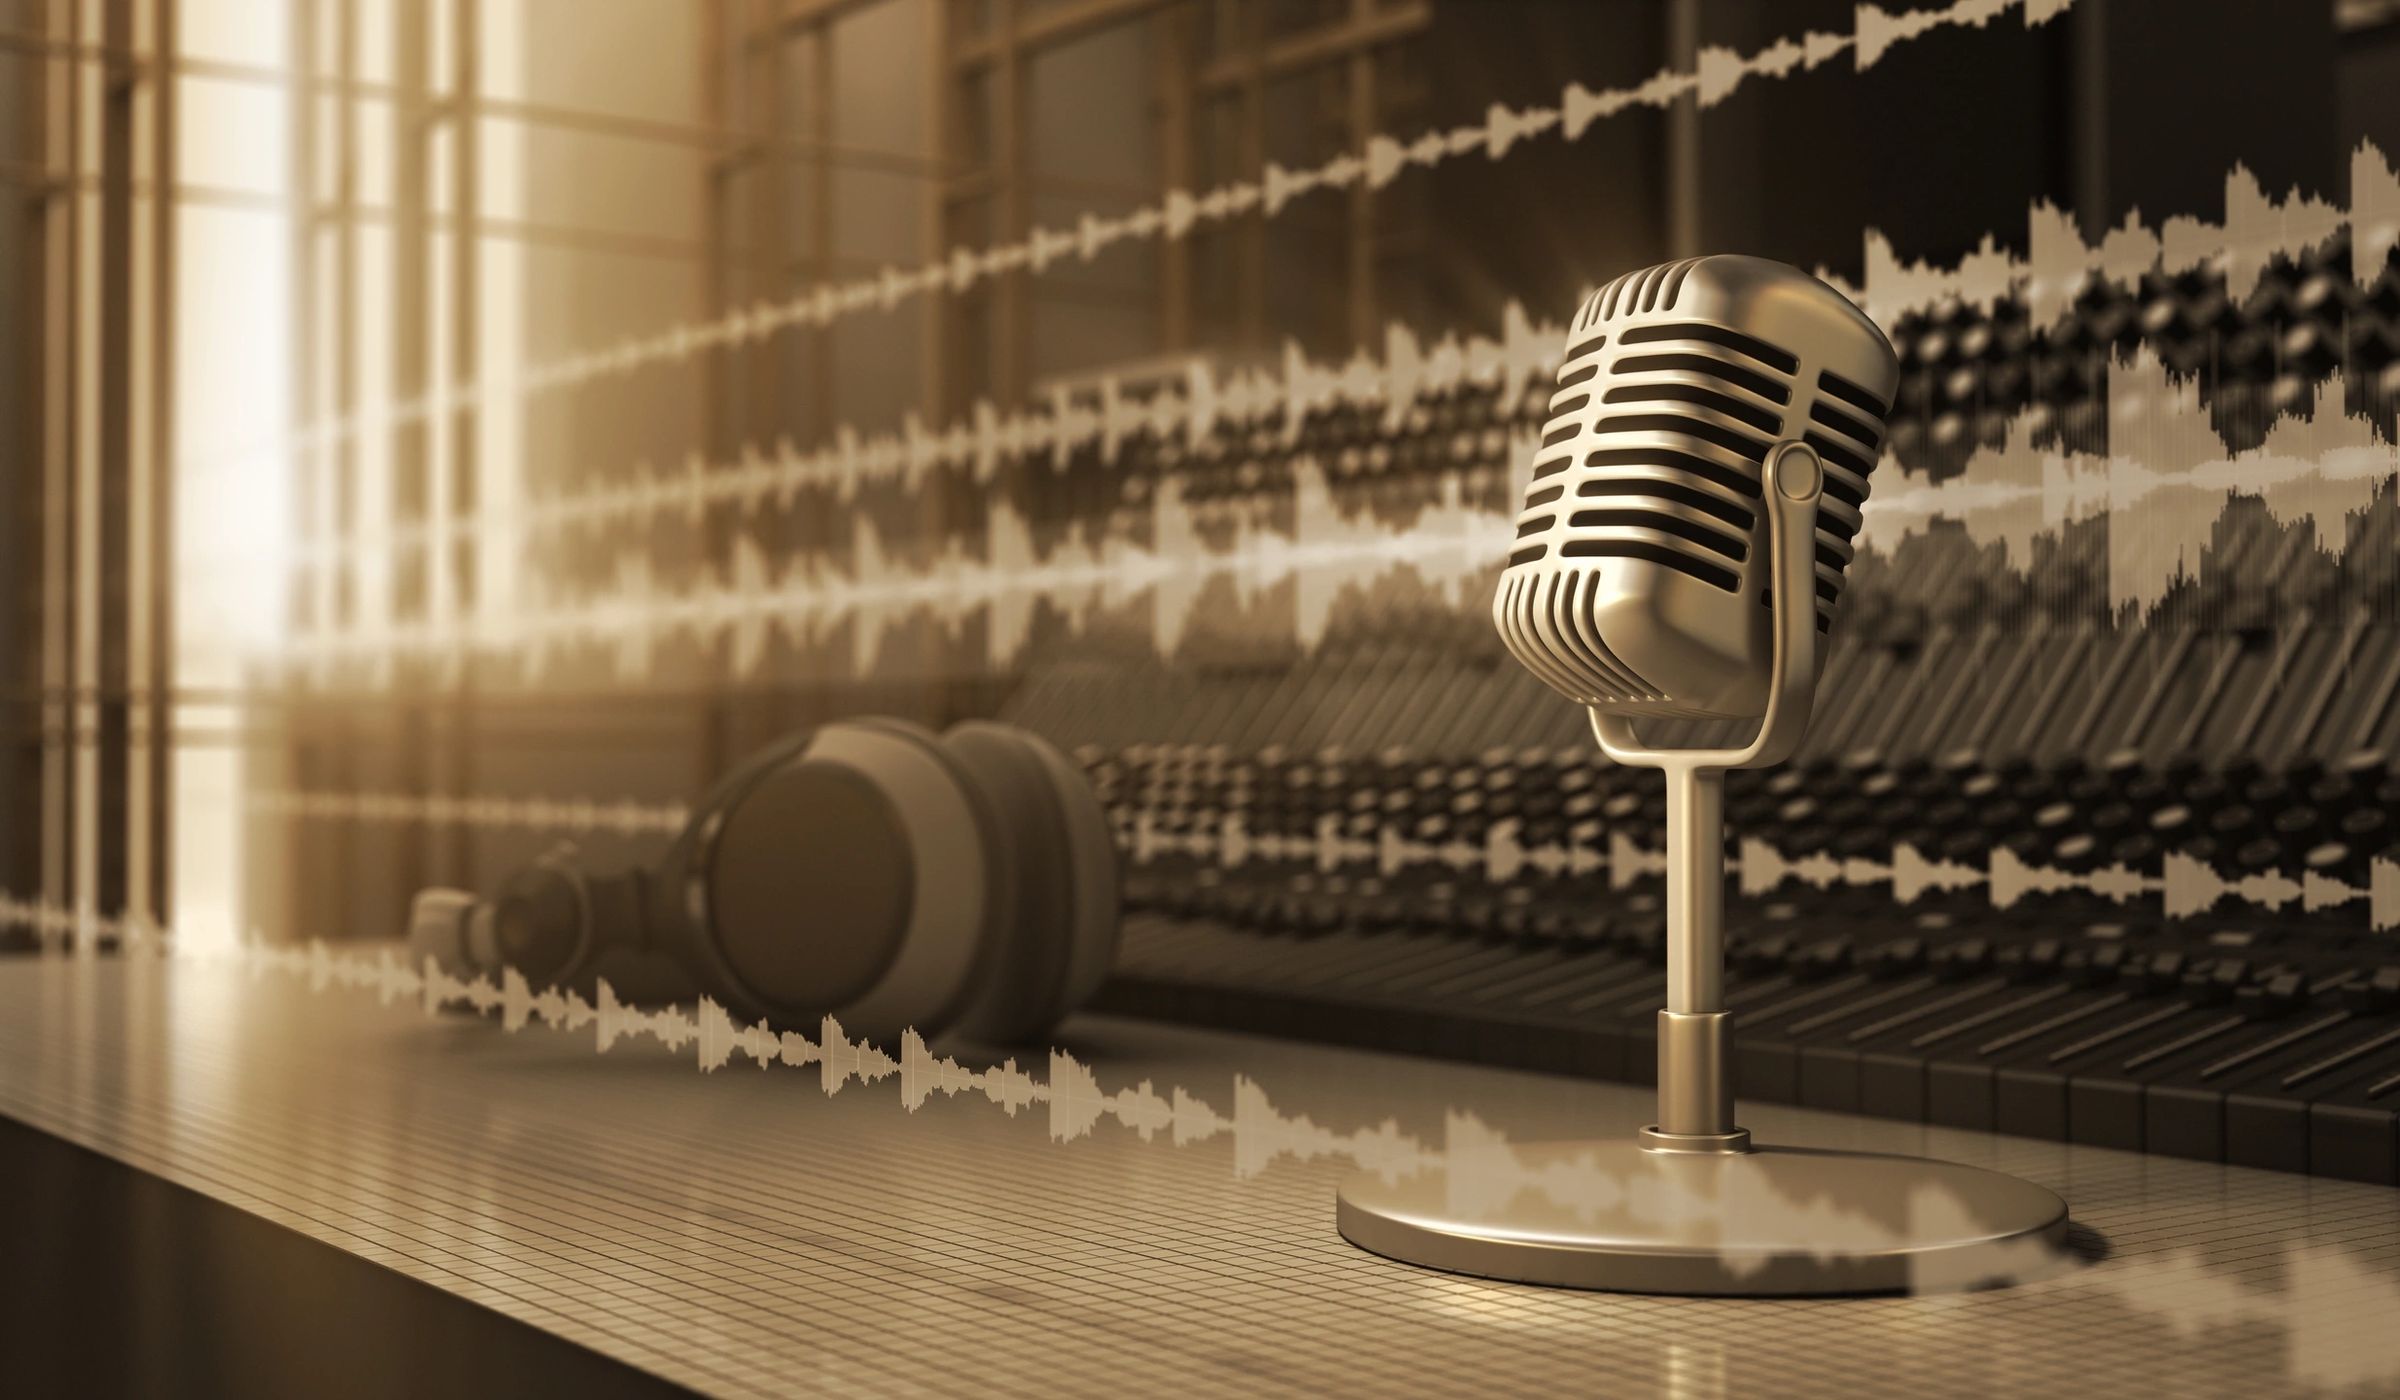 Microphone Images  Free Photos PNG Stickers Wallpapers  Backgrounds   rawpixel